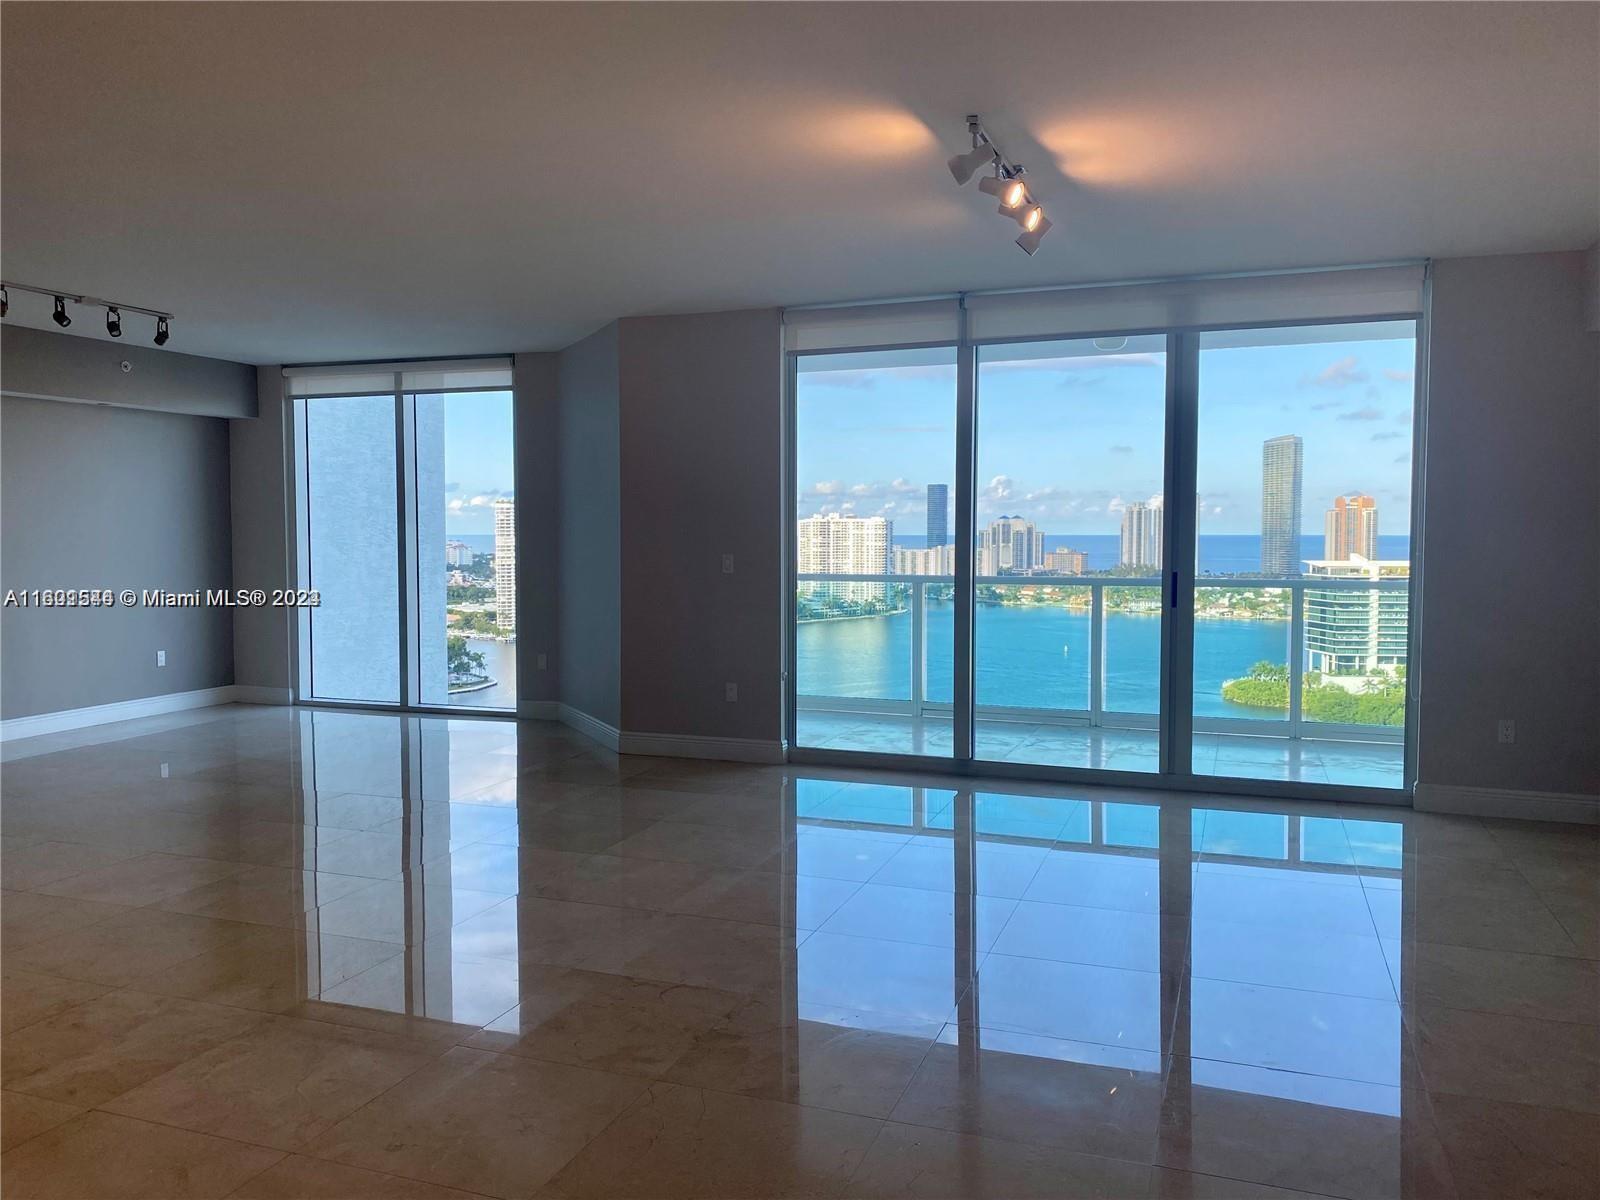 Best high-end building in Aventura, completely open bay view and city. Elegant and in excellent conditions, Best line in building 3/3/1 Plus den. Marble floors through out the unit, Customized closets, new washer and dryer, open kitchen, smart thermostat, magnificent and unique view. Best amenities in Aventura spa, gym, juice bar, tennis, etc.
Storage room included and 2 parking spots